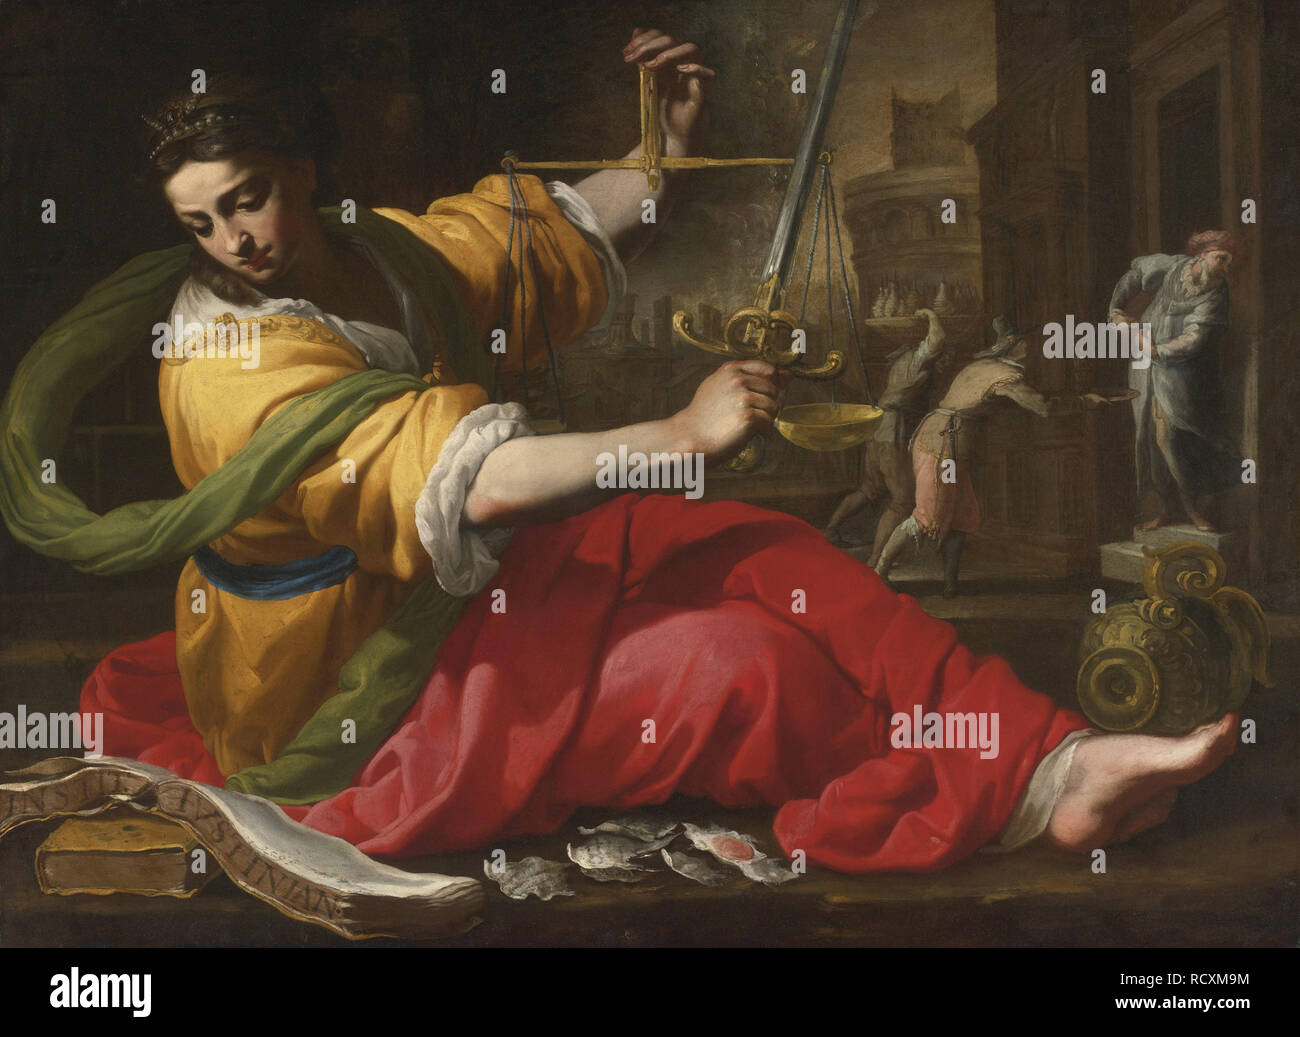 Allegory of Justice. Museum: PRIVATE COLLECTION. Author: Mei, Bernardino. Stock Photo